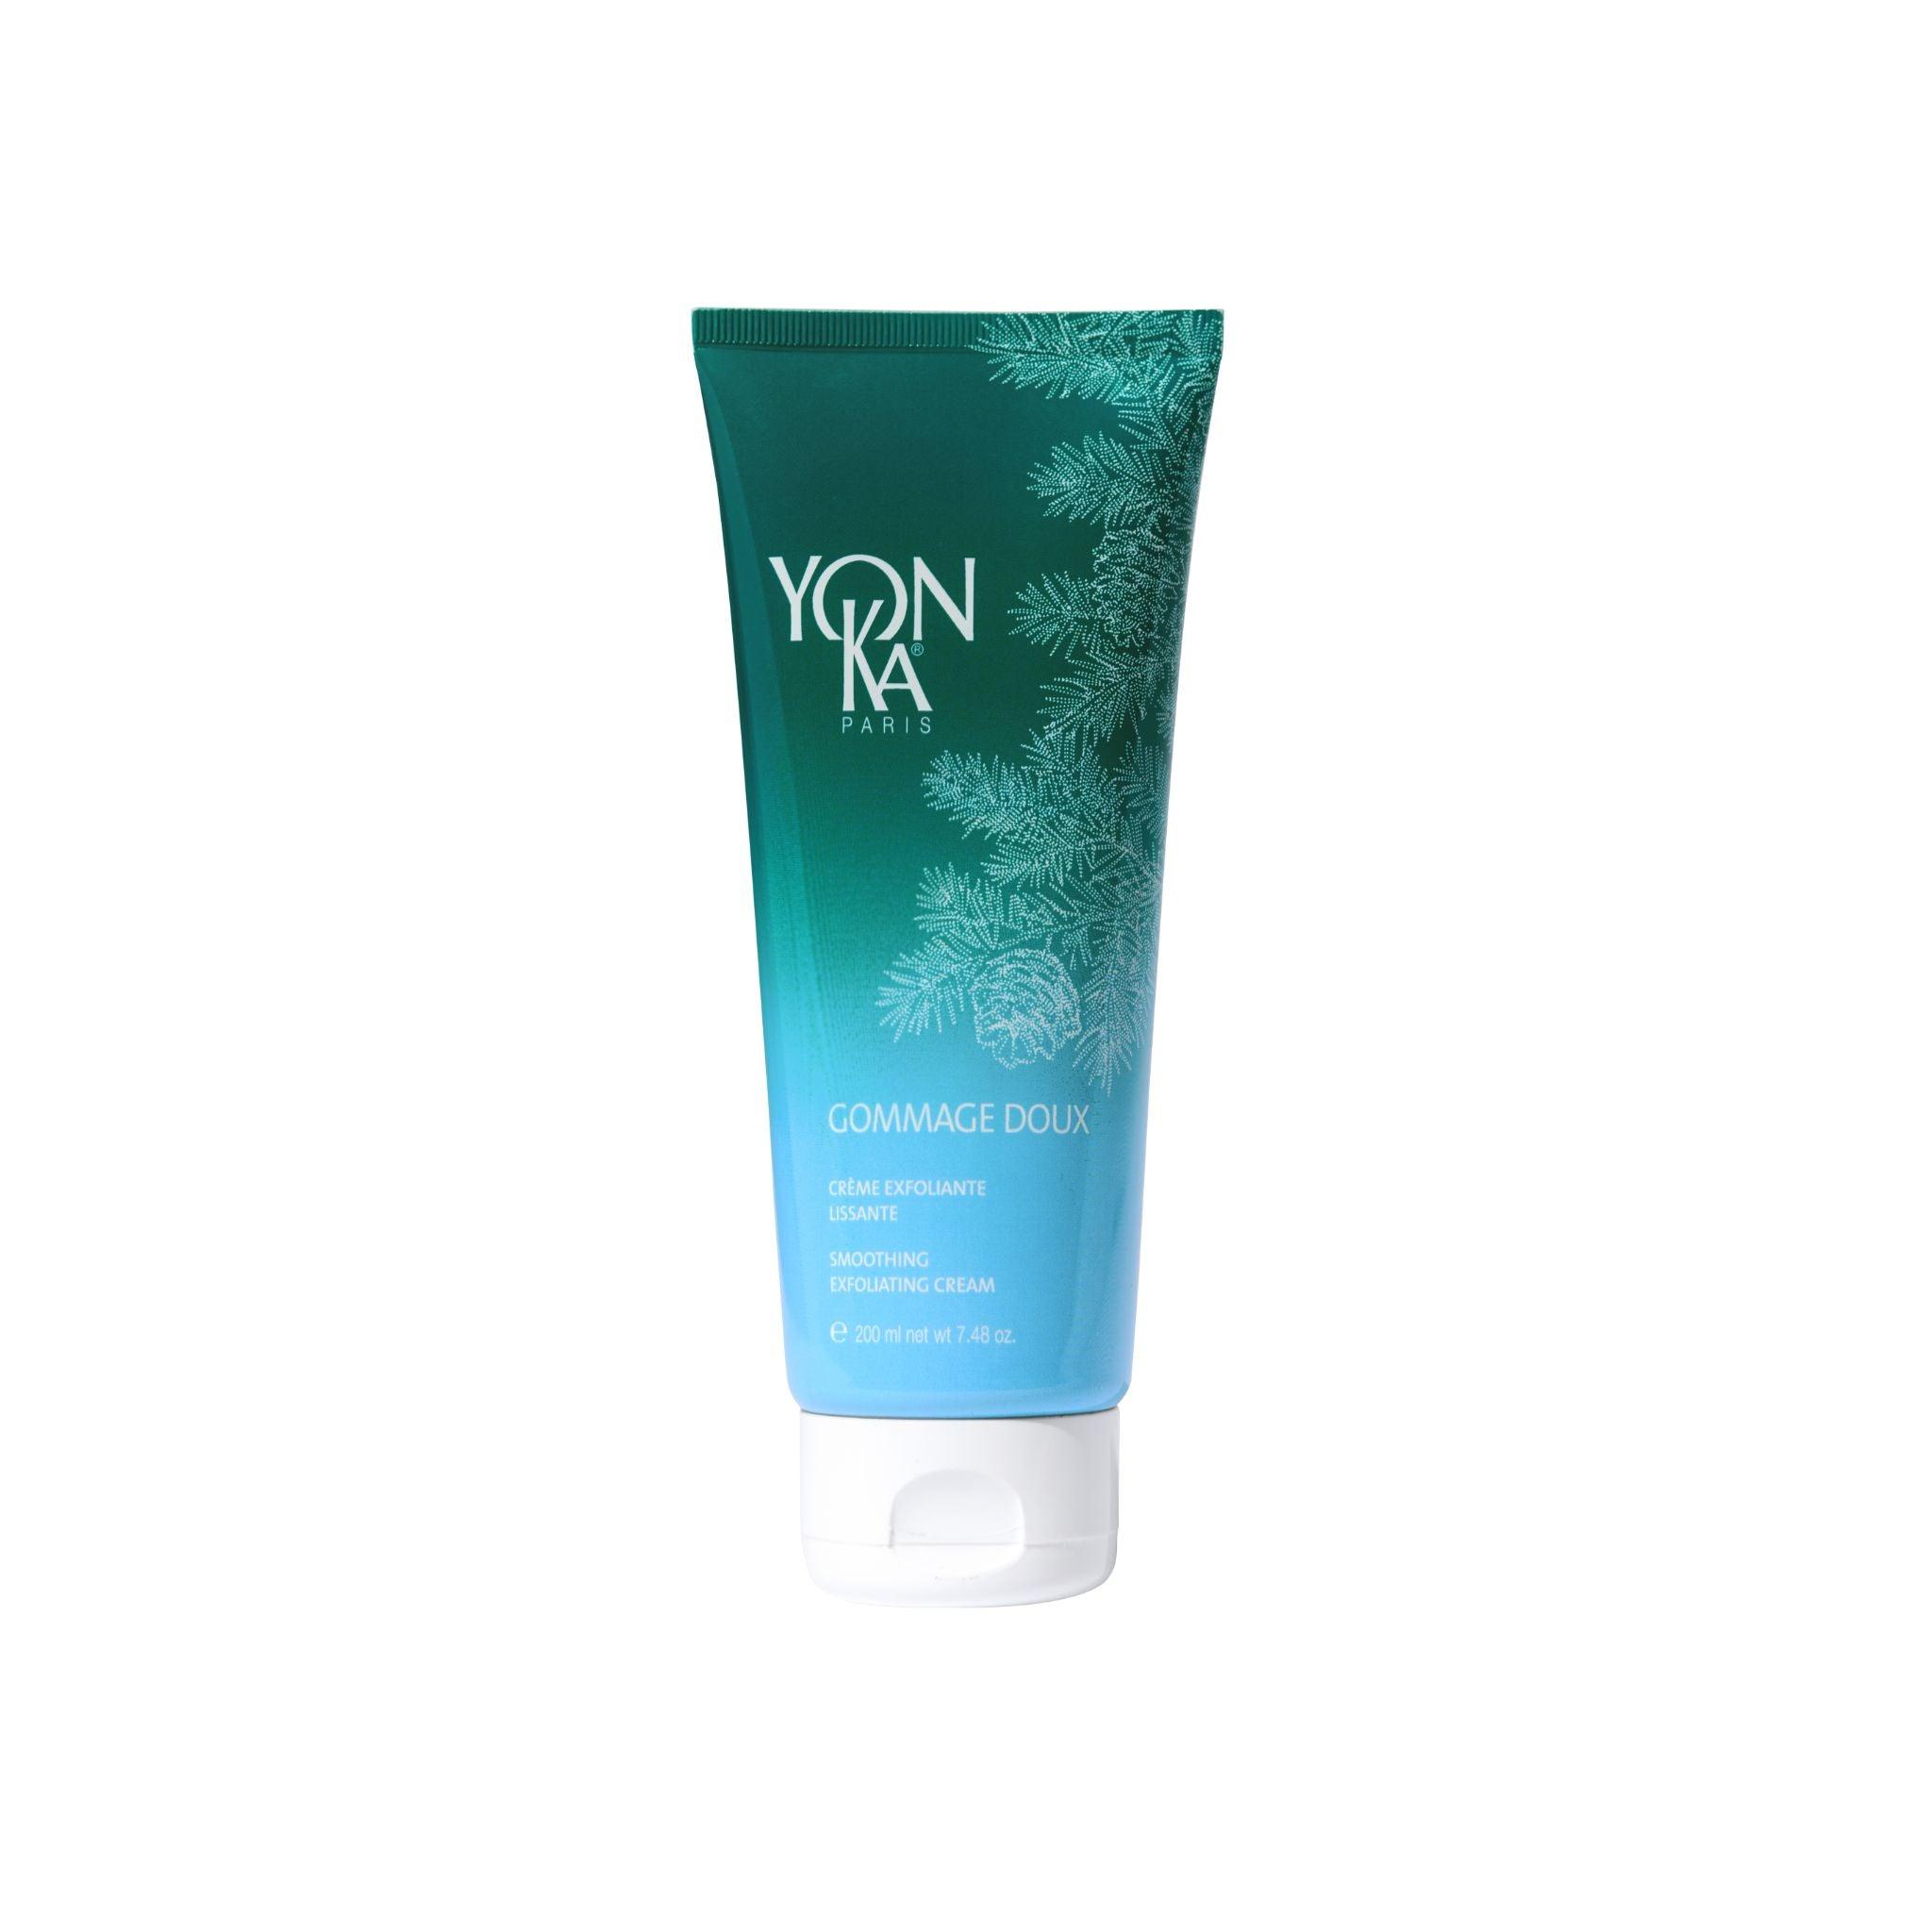 YonKa Gommage Doux Silhouette Exfoliating Cream - The Beauty House Shop